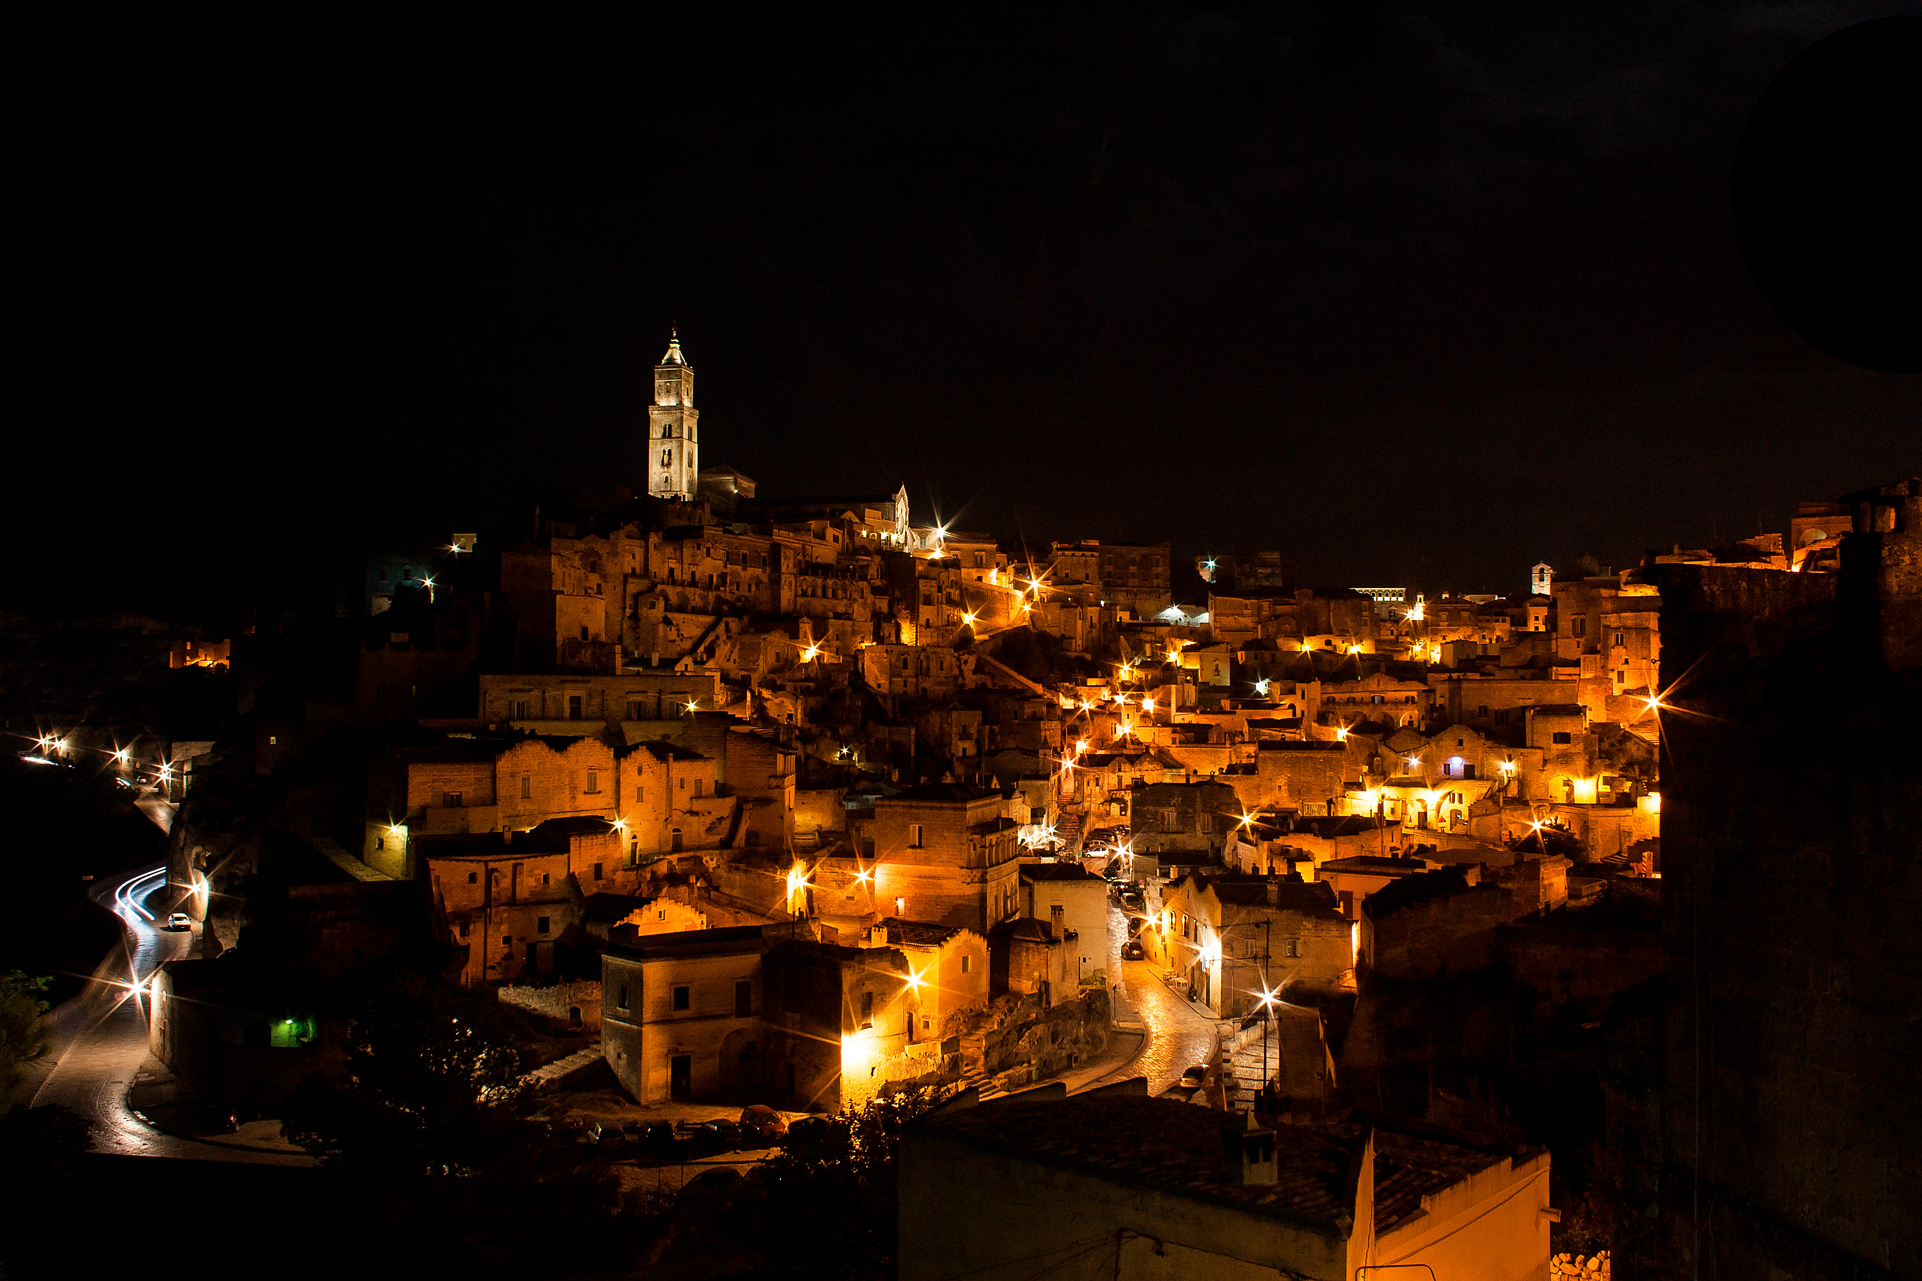 In the evening in Matera...